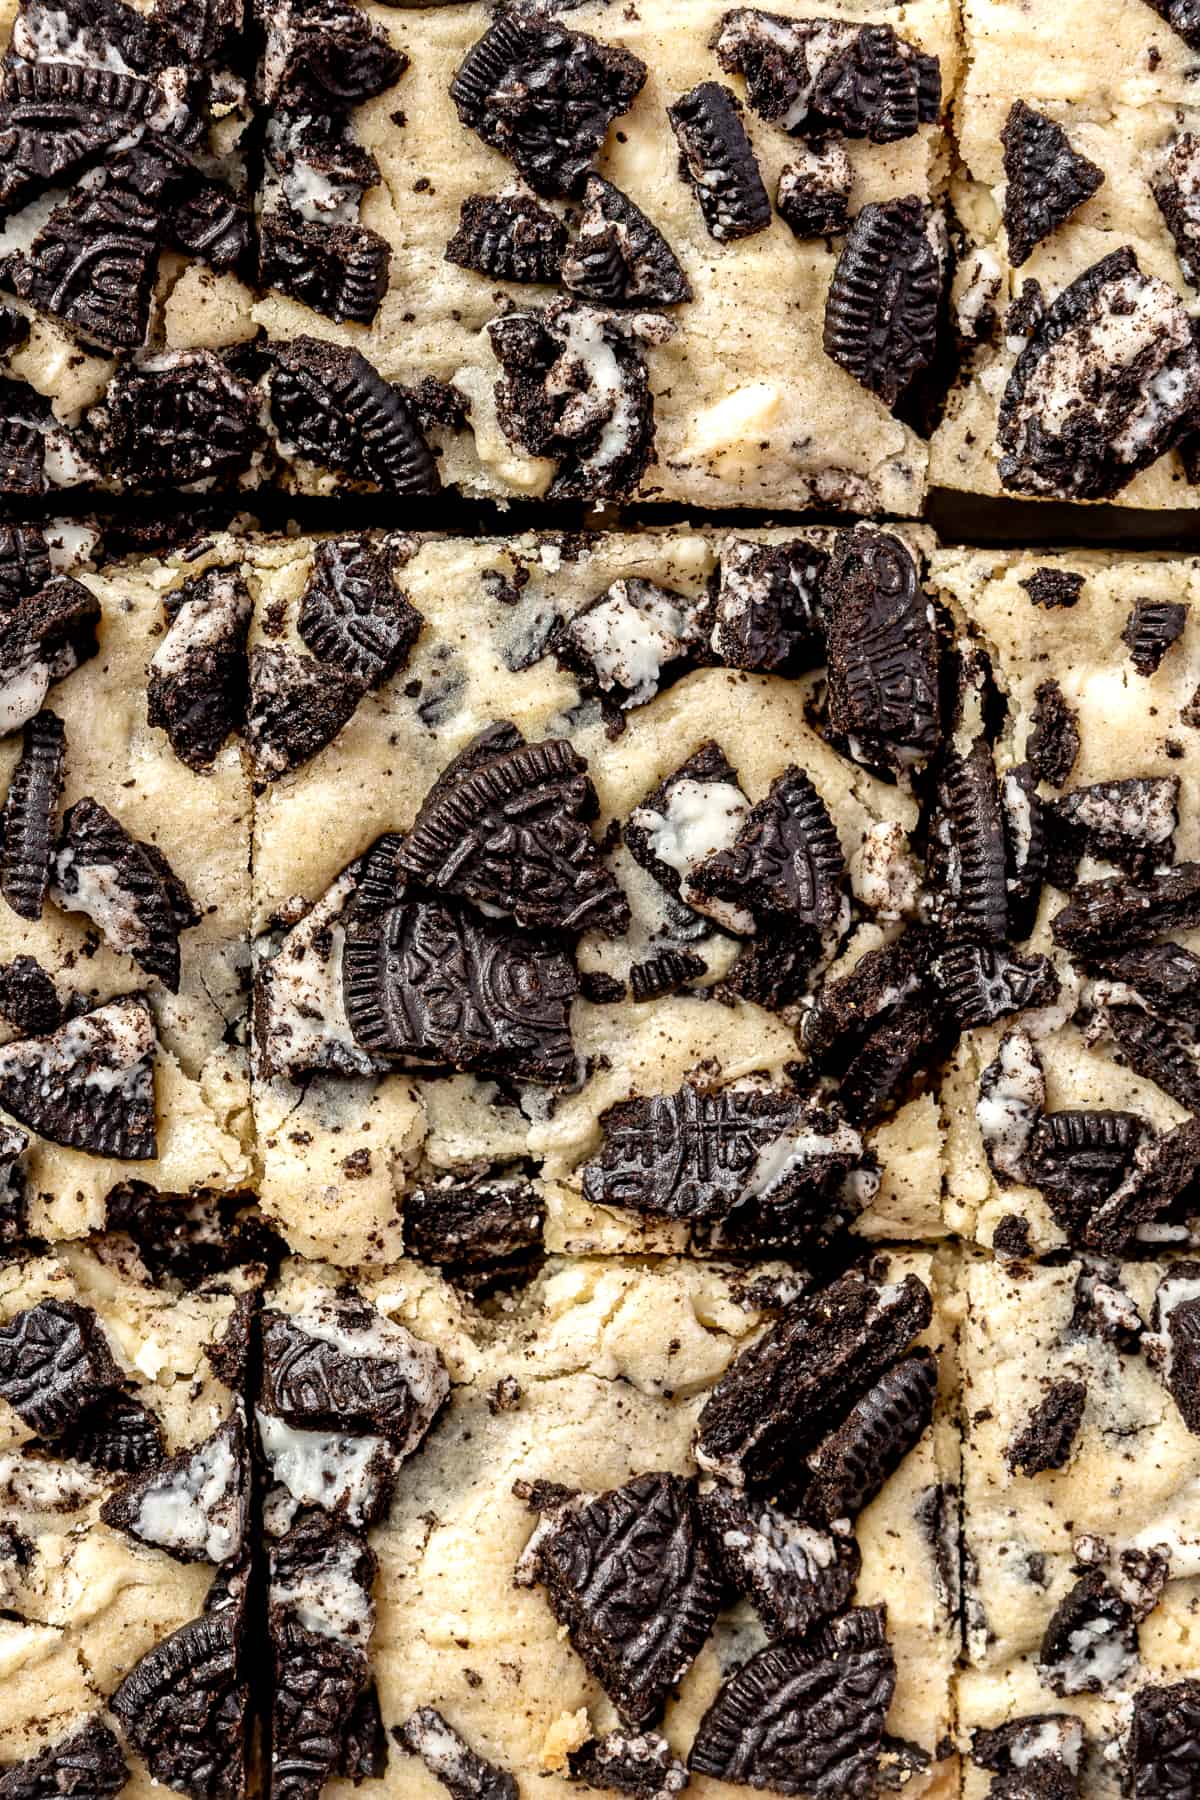 Up close view of baked Oreo bars after being sliced.